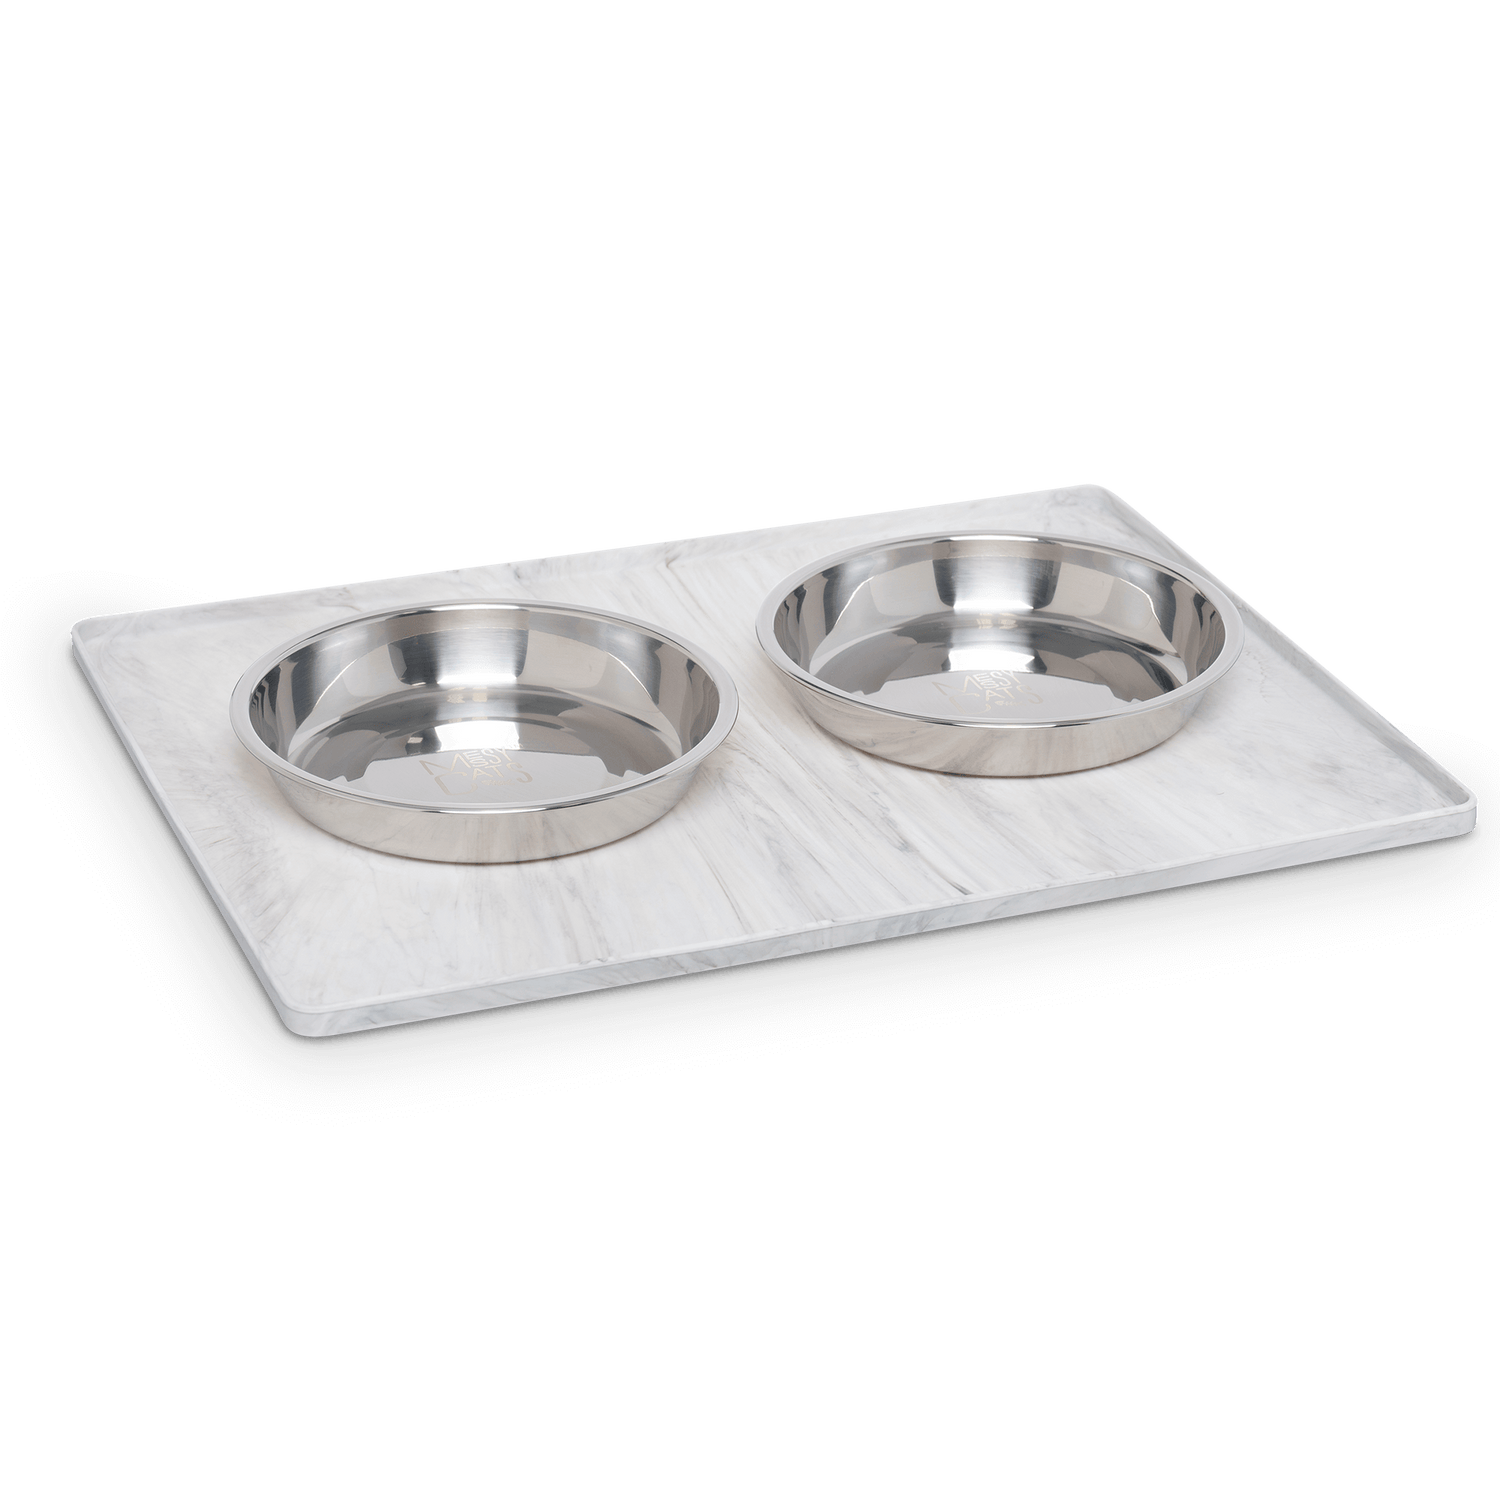 Non slip cat and dog bowl mat.  Rolls up for easy storage.  Fits two bowls with ease.  